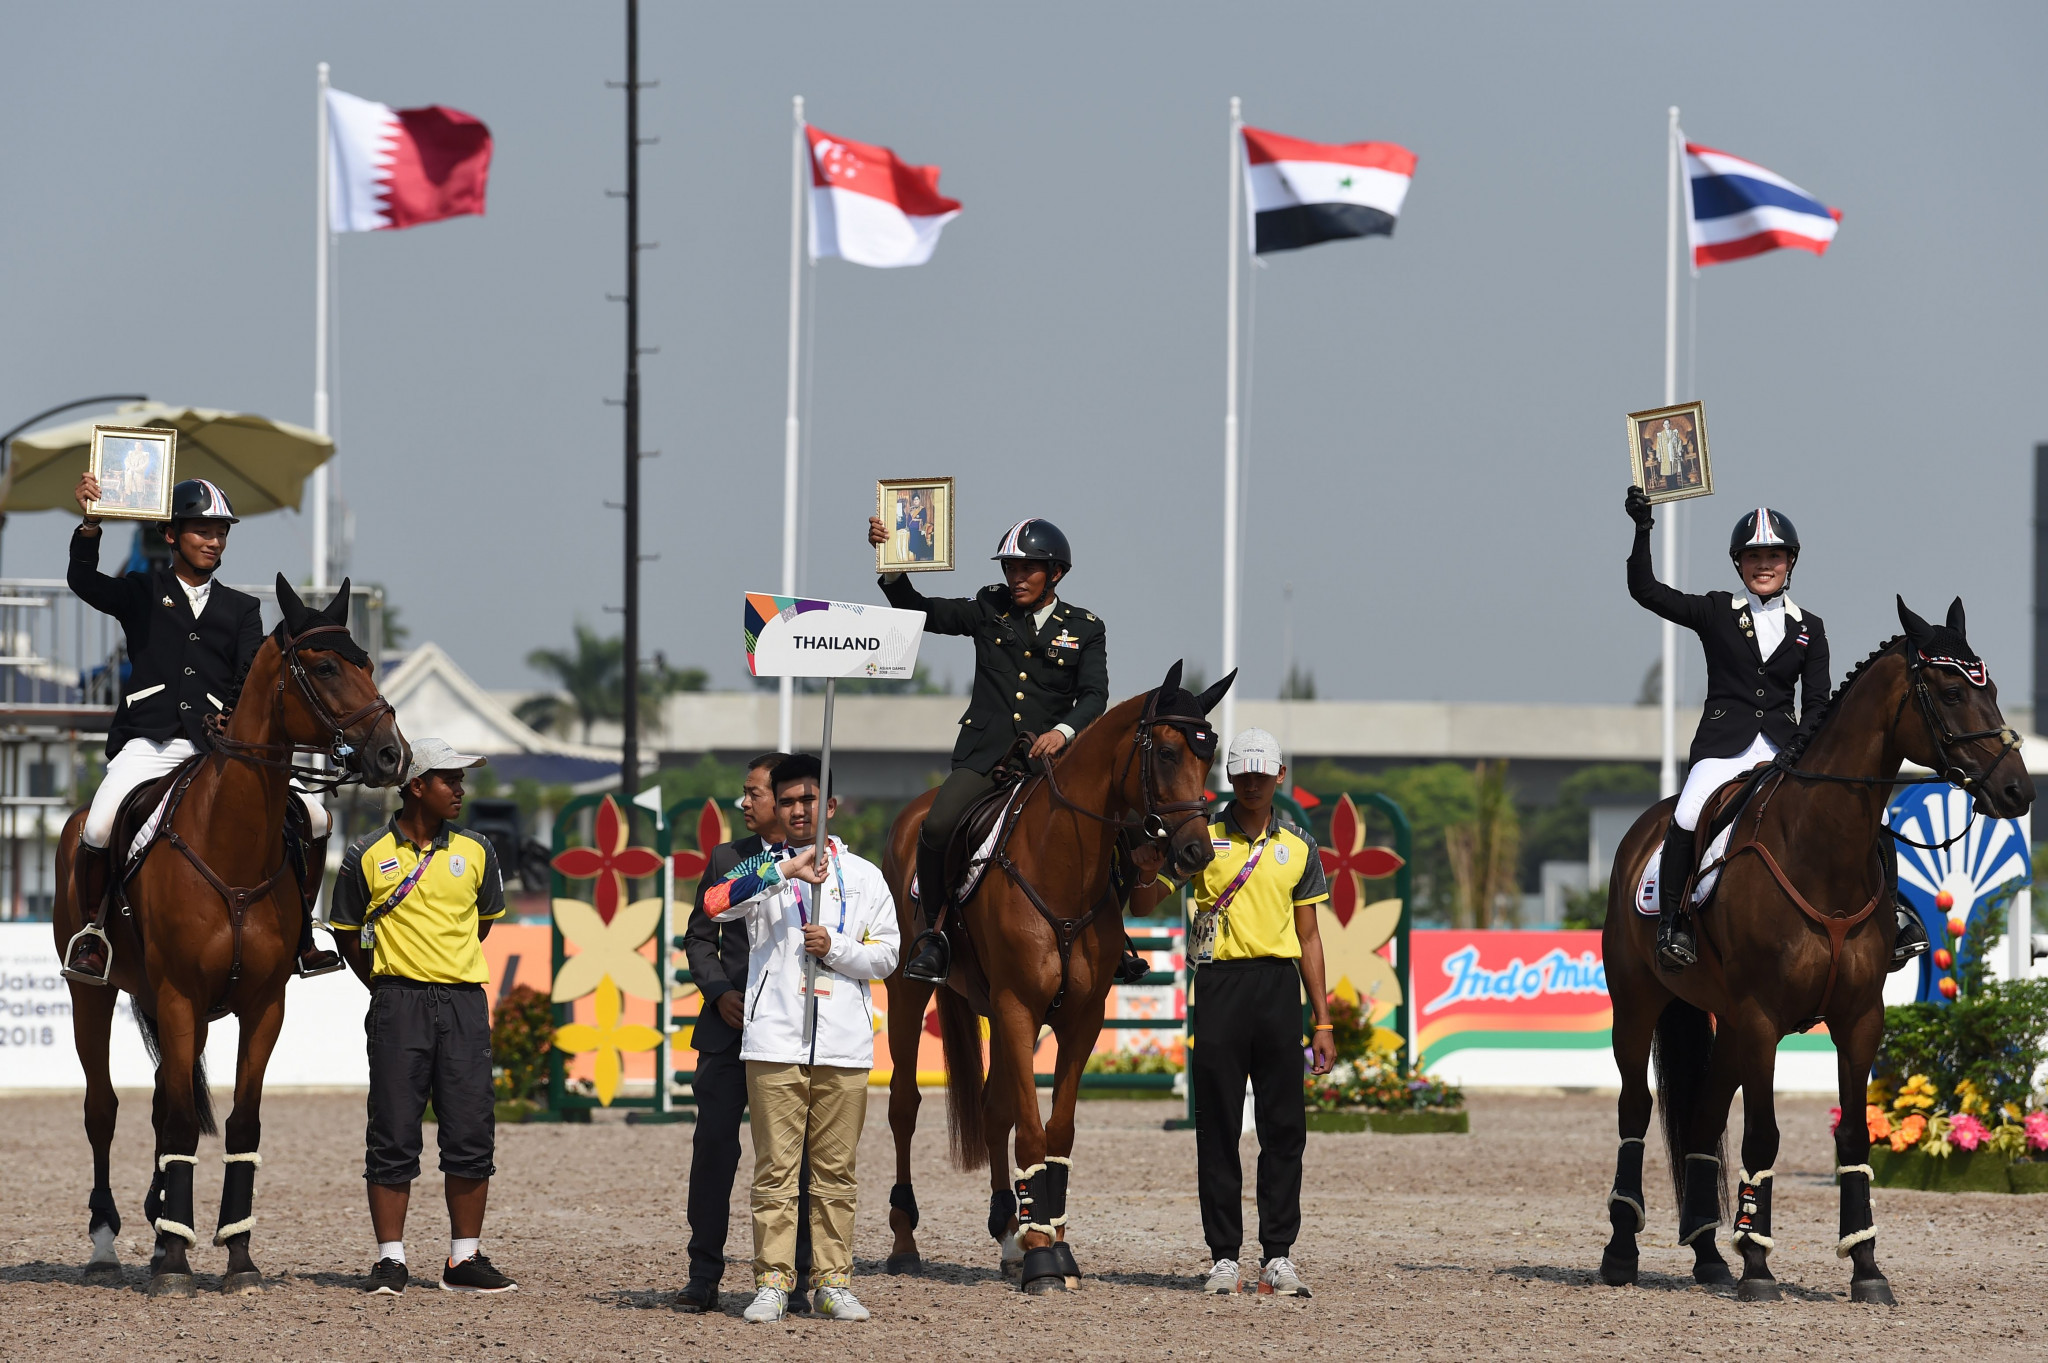 FEI Asian Championships moved to 2025 after Asian Games postponement